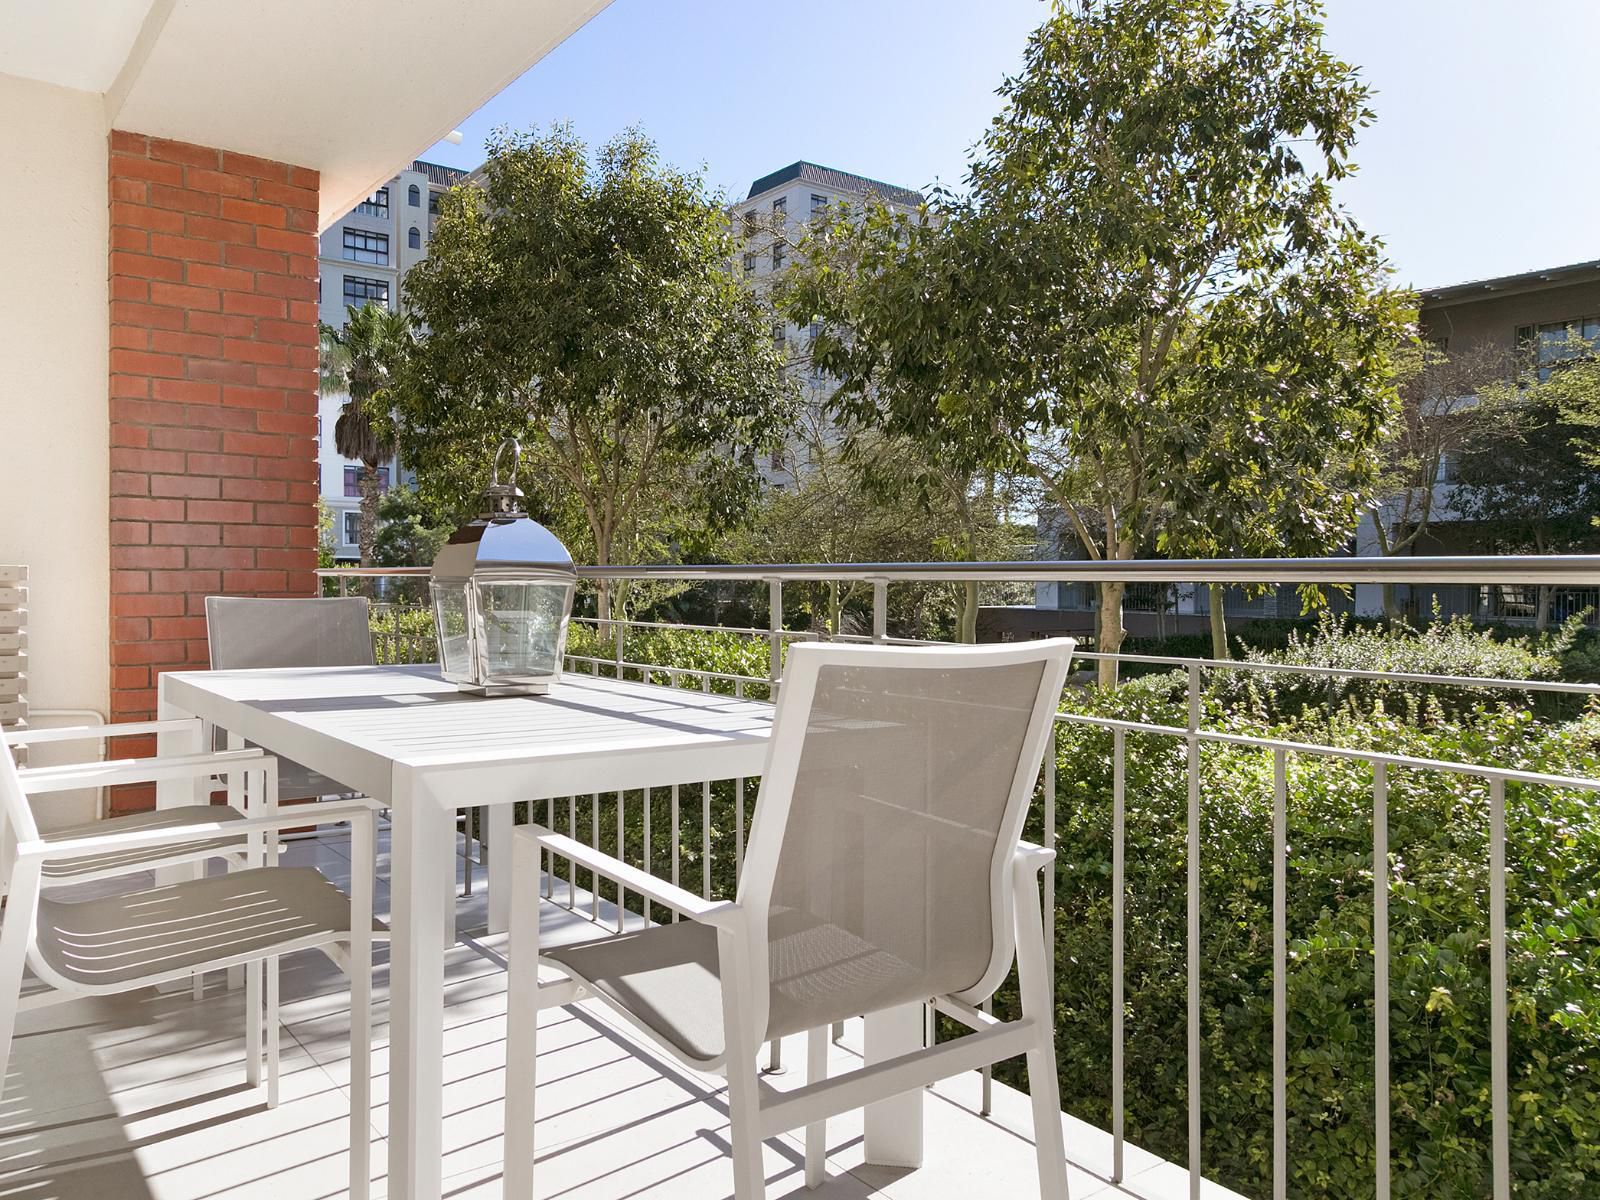 Luxury 2 Bedroom Apartment In Century City Century City Cape Town Western Cape South Africa Balcony, Architecture